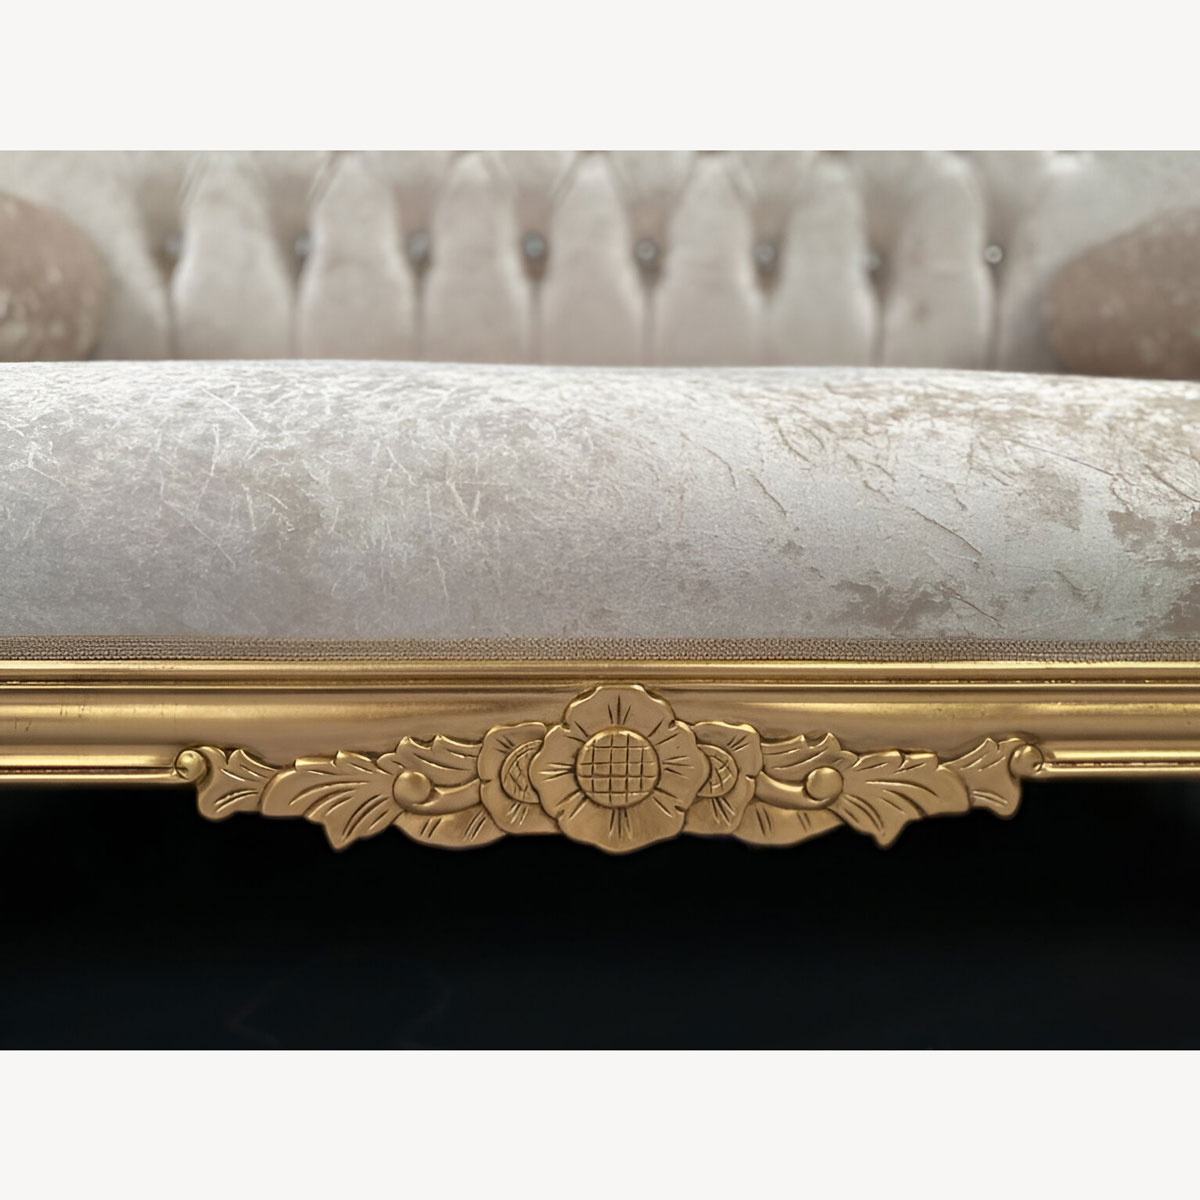 Chaise Hampshire Sofa In Gold Leaf Frame Upholstered In Ivory Cream Crushed Velvet With Crystal Buttoning 5 - Hampshire Barn Interiors - Chaise Hampshire Sofa In Gold Leaf Frame Upholstered In Ivory Cream Crushed Velvet With Crystal Buttoning -